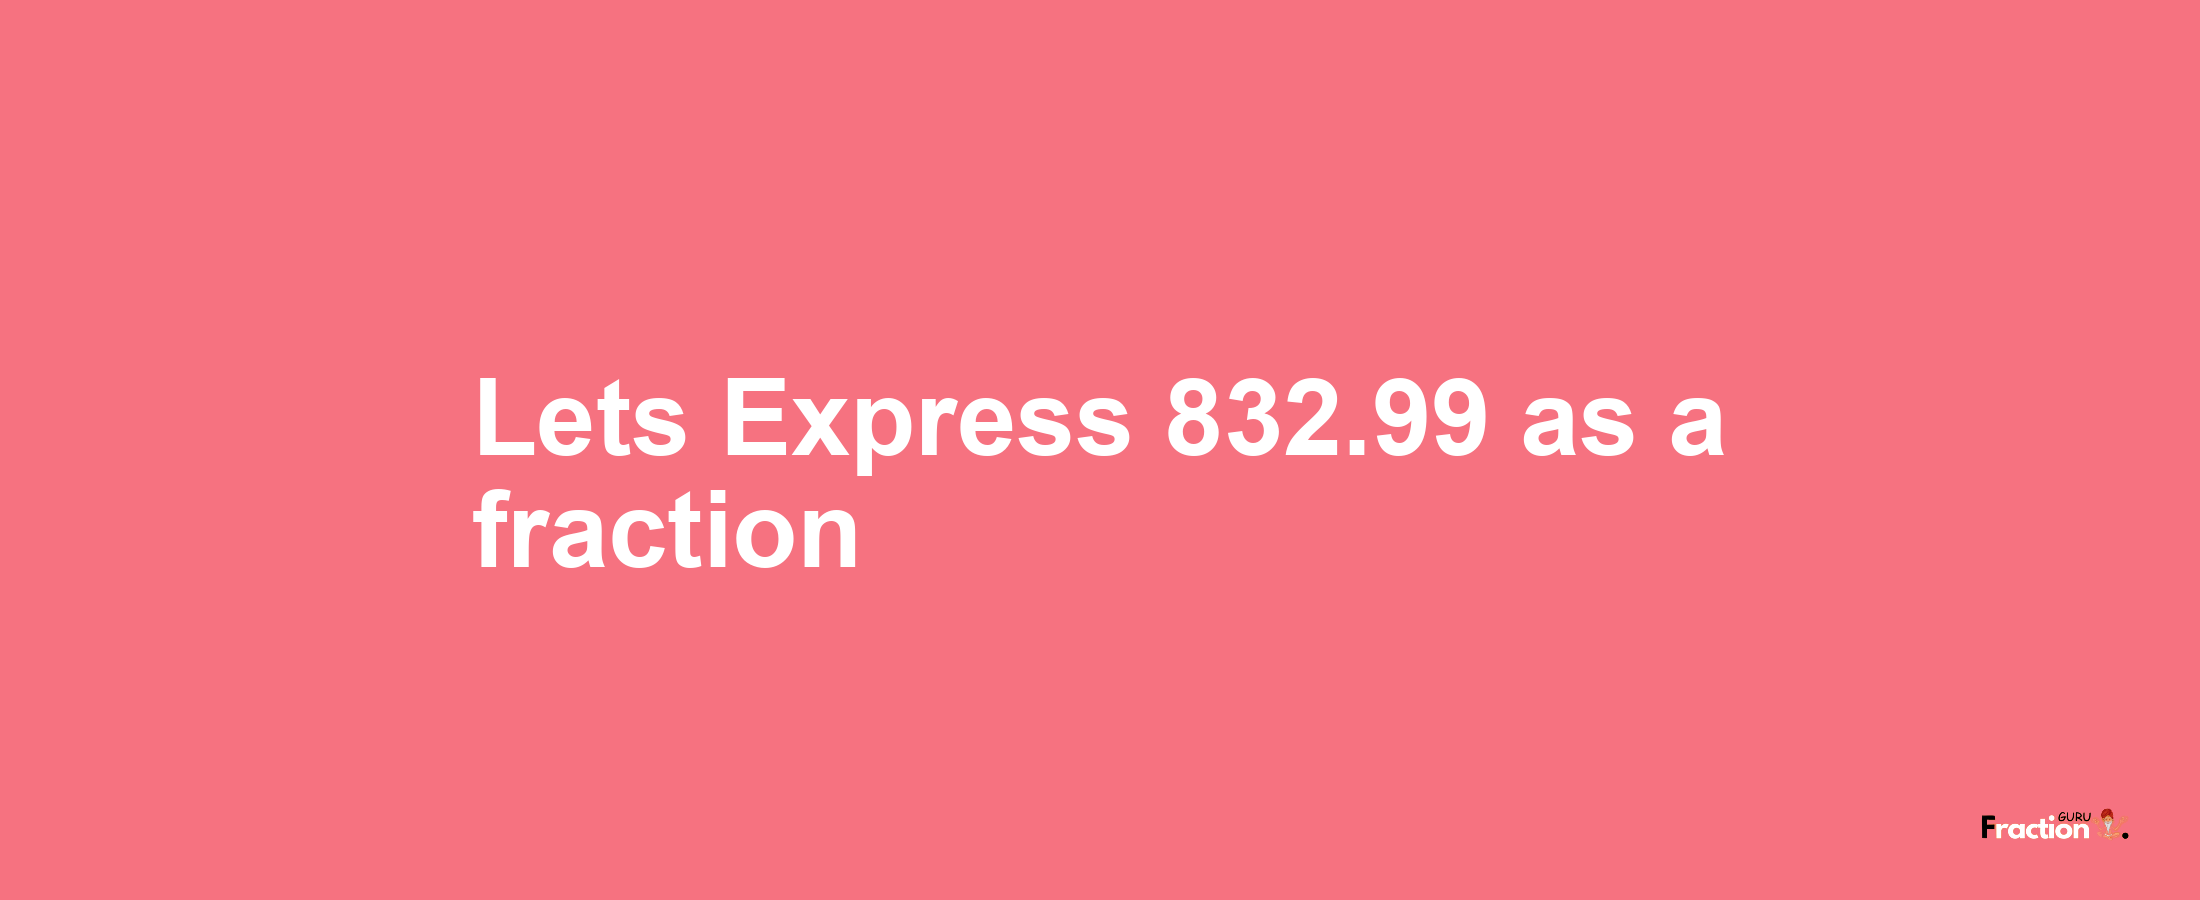 Lets Express 832.99 as afraction